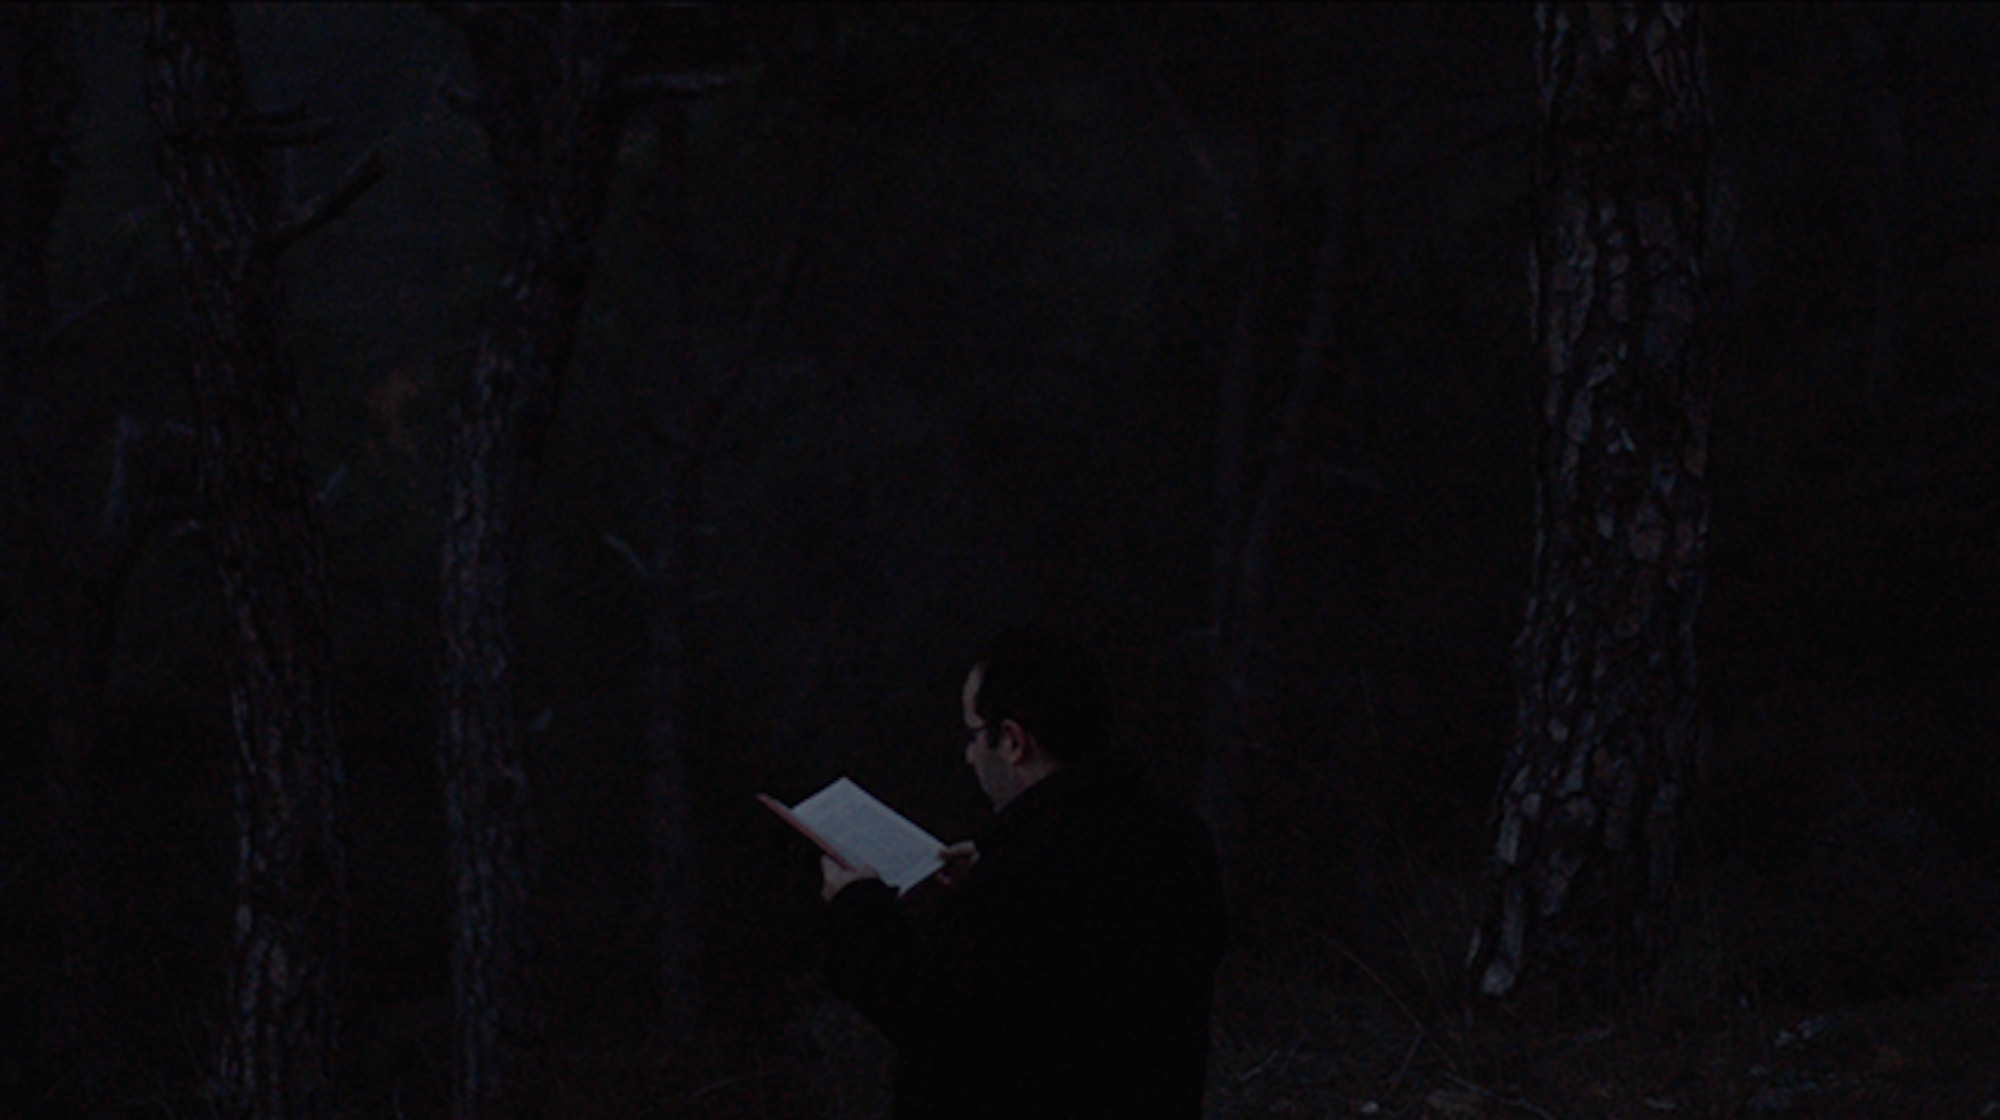  No Light In White Light 2014 Video 00:11:00   A Syriac priest starts reading the genesis in Aramaic, a dead language, a few minutes before day fall in a forest in Mount Lebanon. With the light getting dimmer, the reading becomes more and more diffic